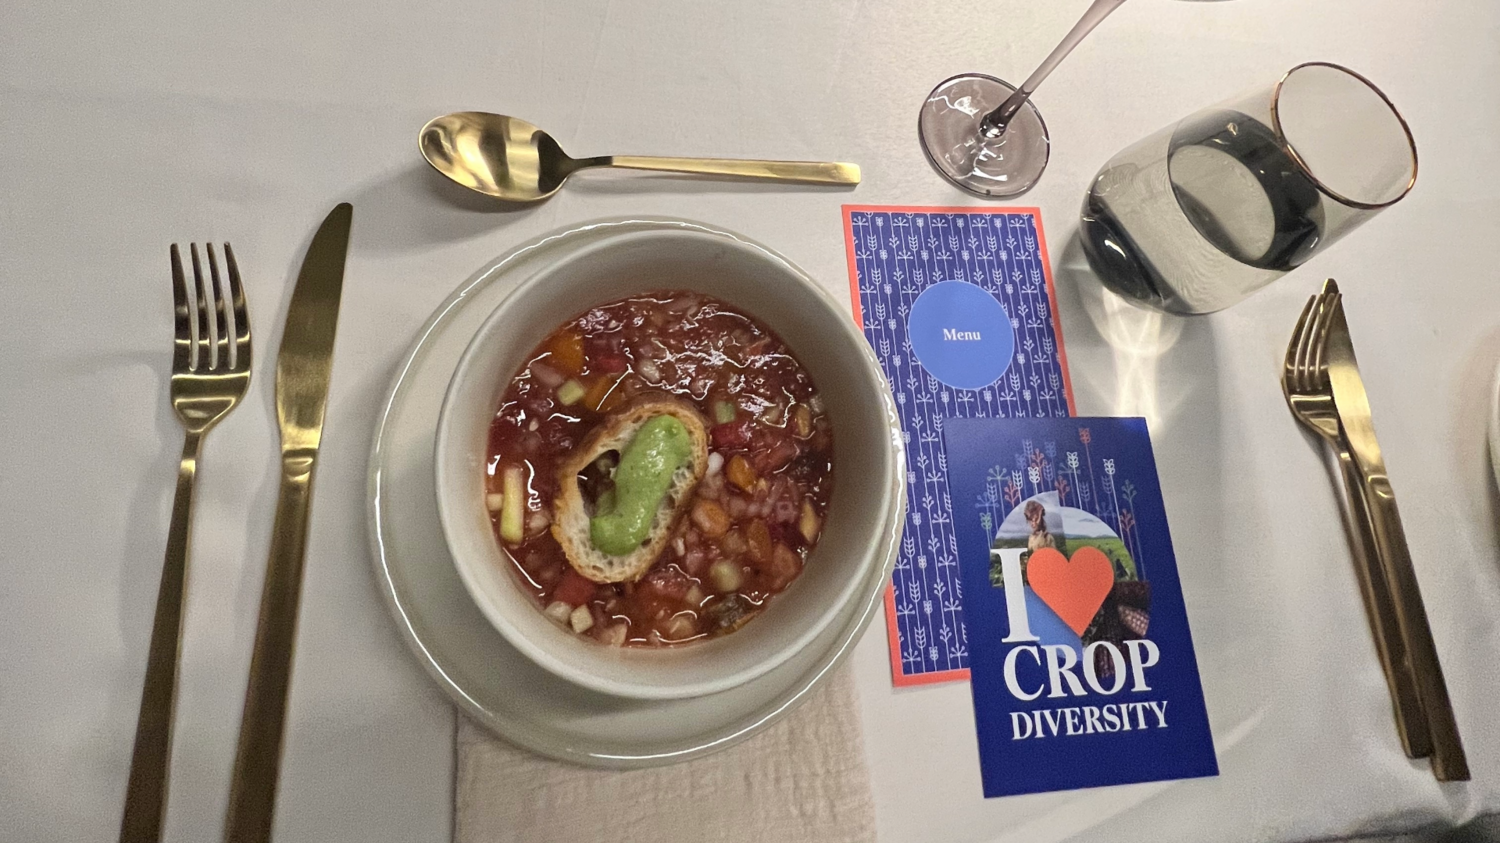 Chef Erik Oberholtzer served a colorful dinner that celebrated crop diversity from around the globe. Photo: Bailey Cate/Crop Trust